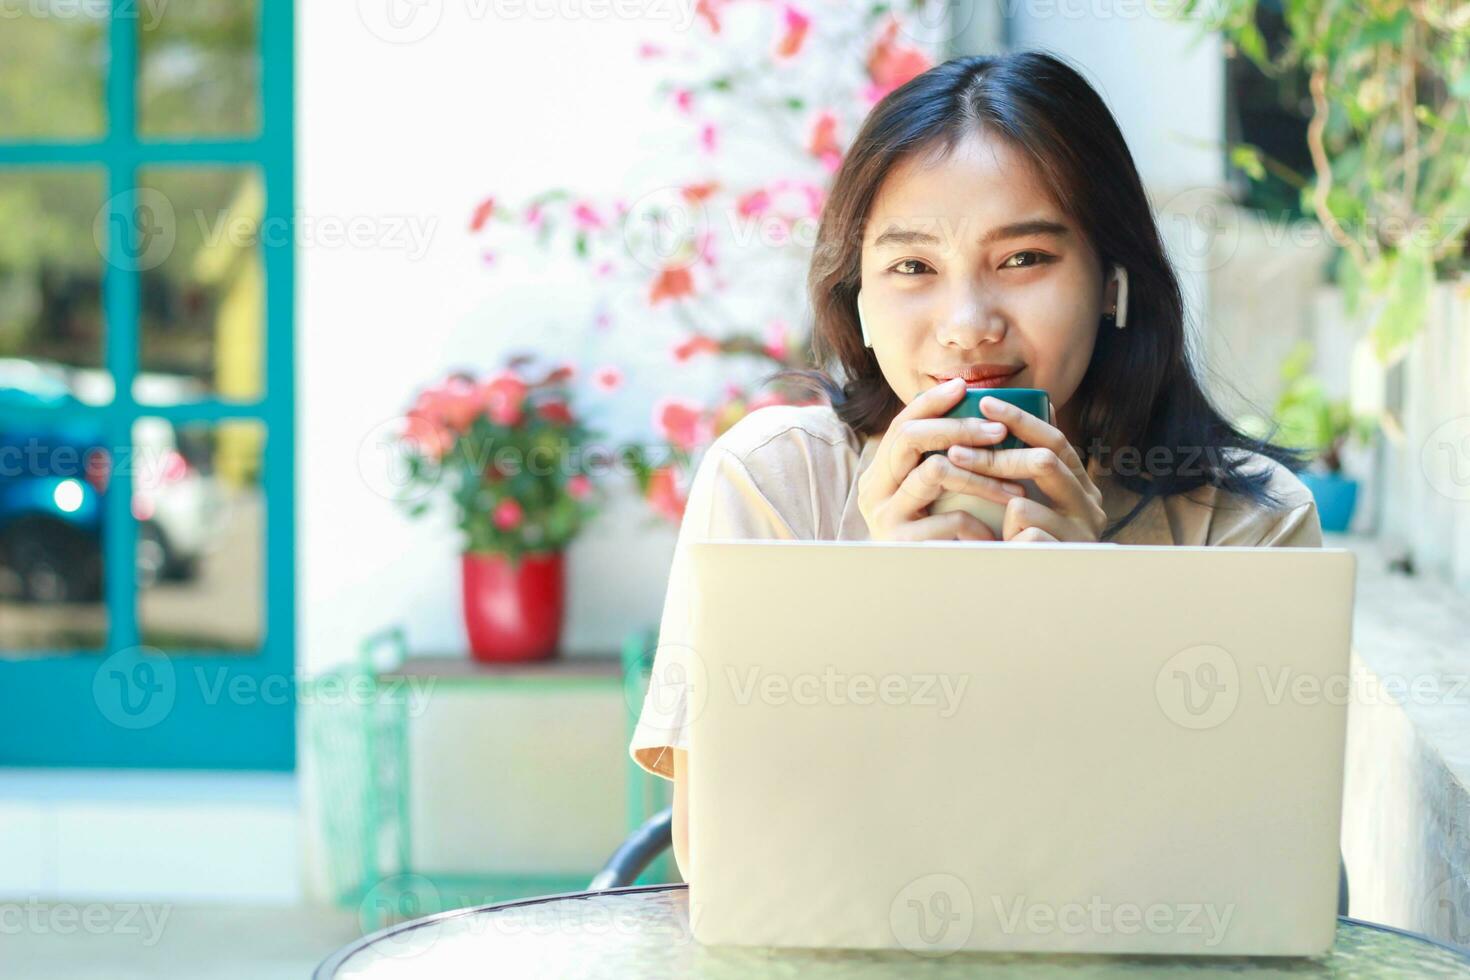 happy asian woman drink coffe while work in cafe with laptop sit in outdoors wearing casual clothes fashionable, female remote worker smiling look at camera photo